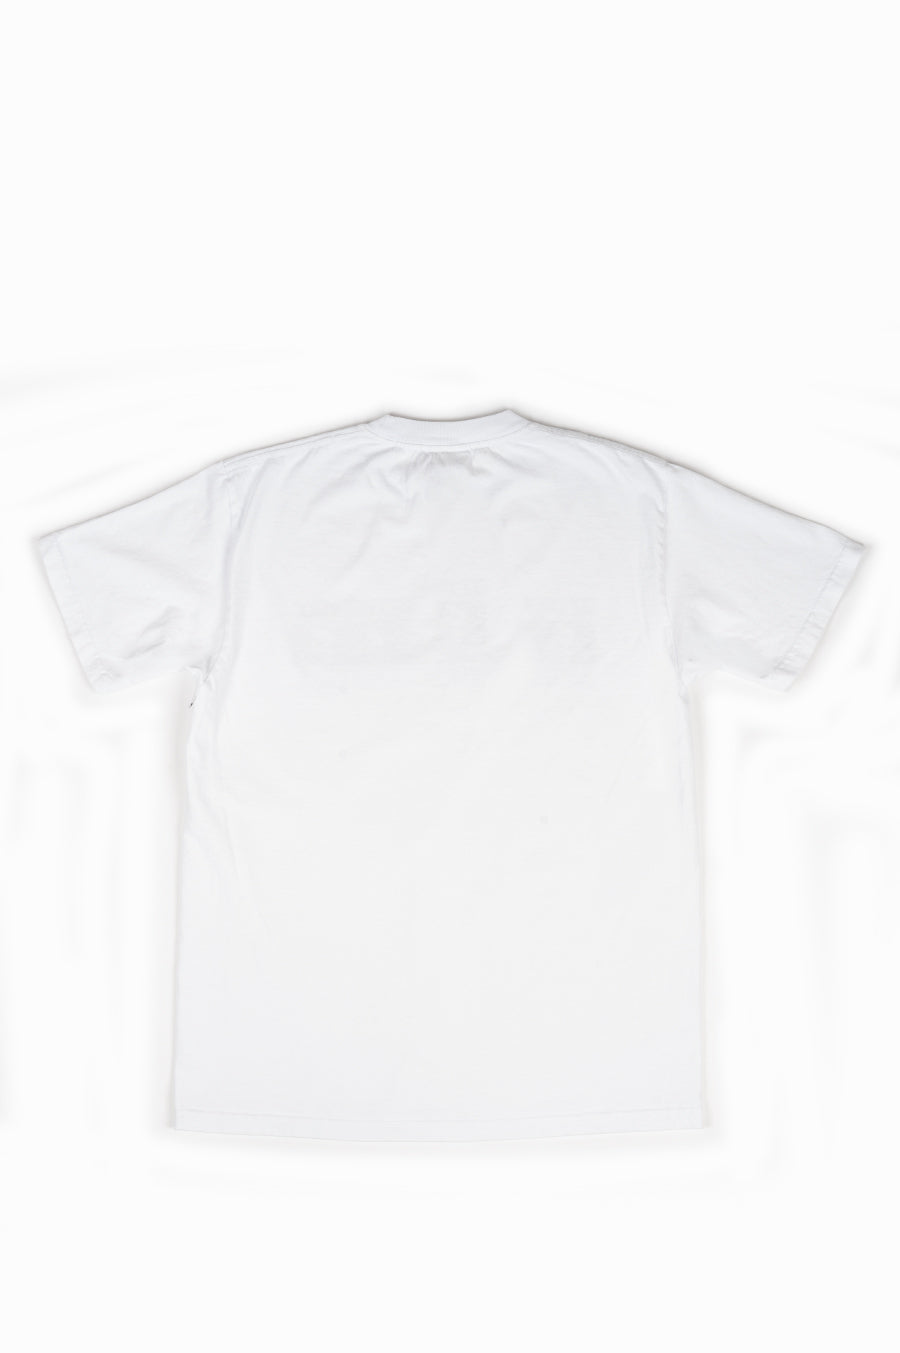 SPORTY AND RICH CYCLING CLUB T-SHIRT WHITE